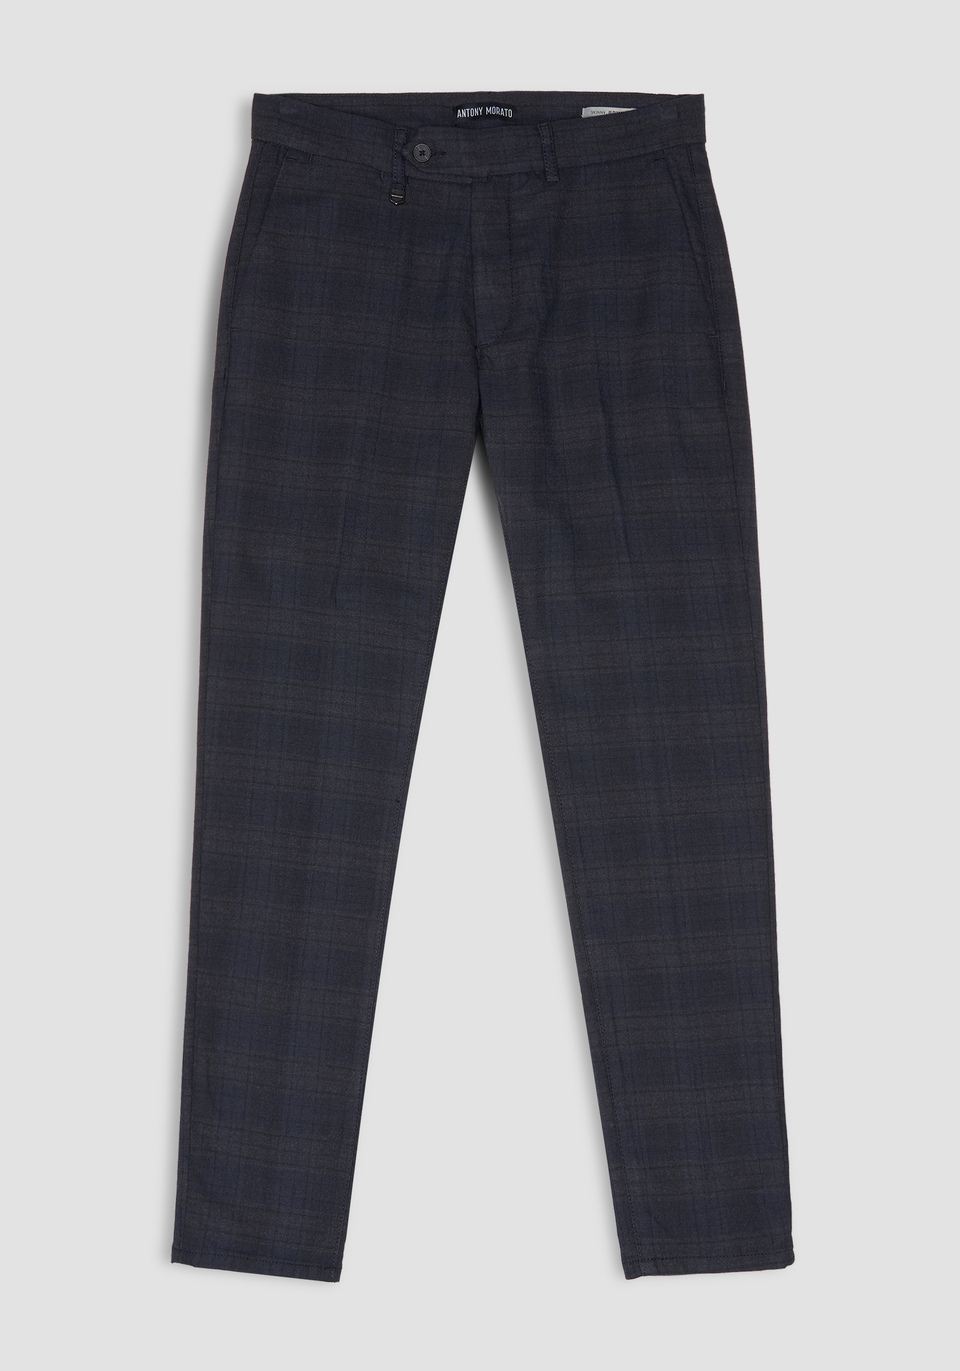 SKINNY-FIT "BRYAN" TROUSERS IN A STRETCHY FABRIC WITH A CHECK PATTERN - Antony Morato Online Shop